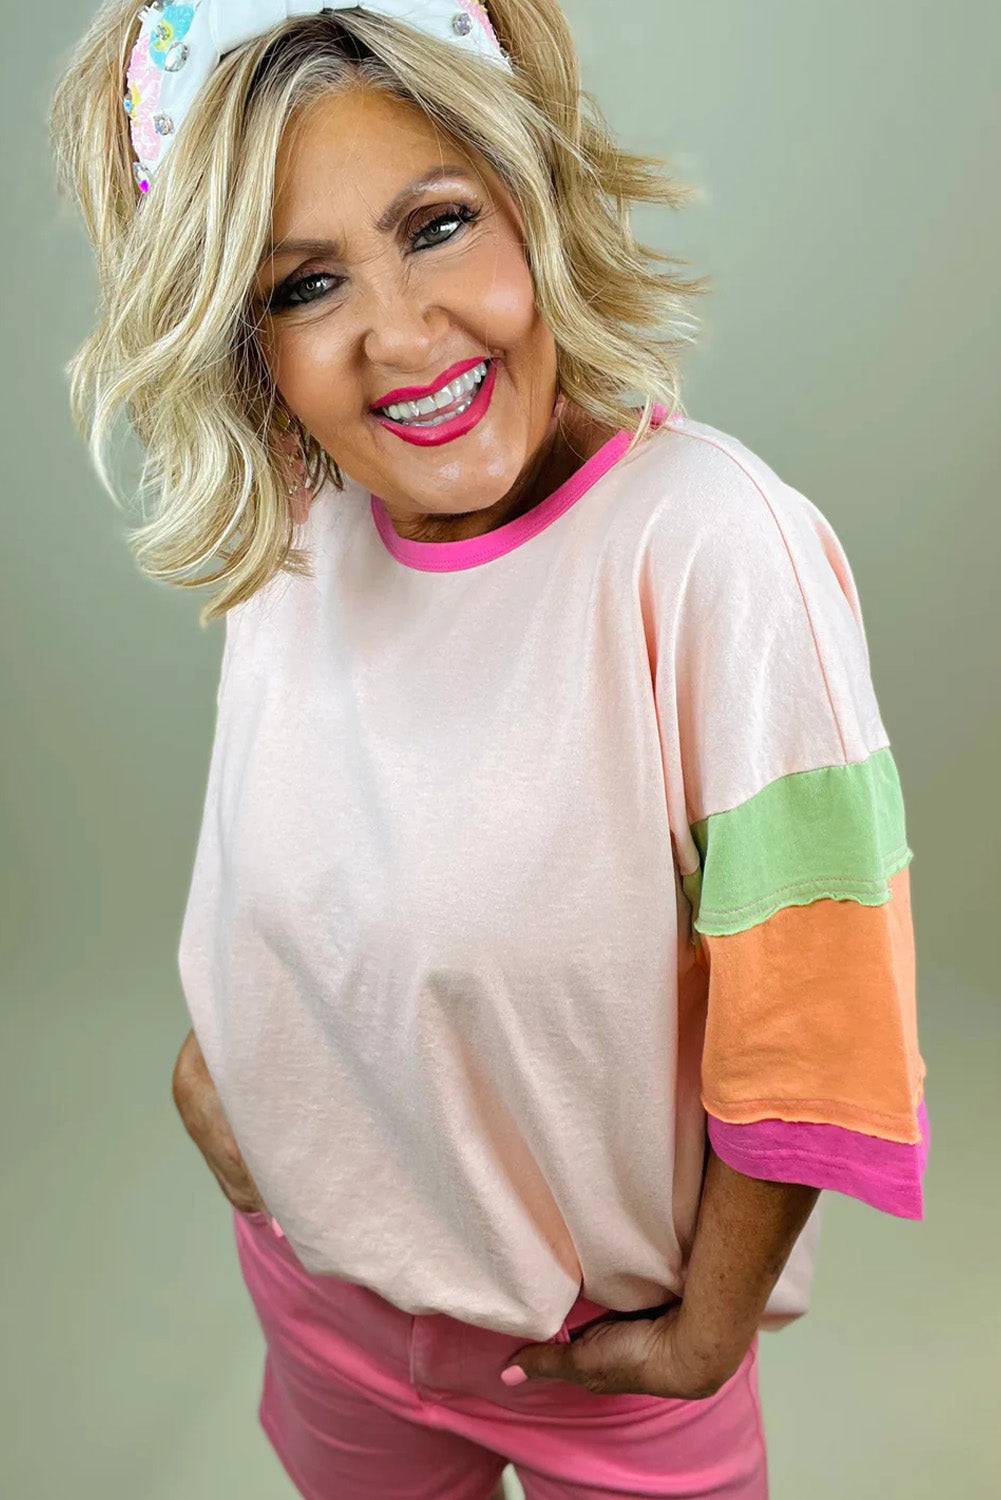 a woman with blonde hair wearing a pink shirt and pink pants